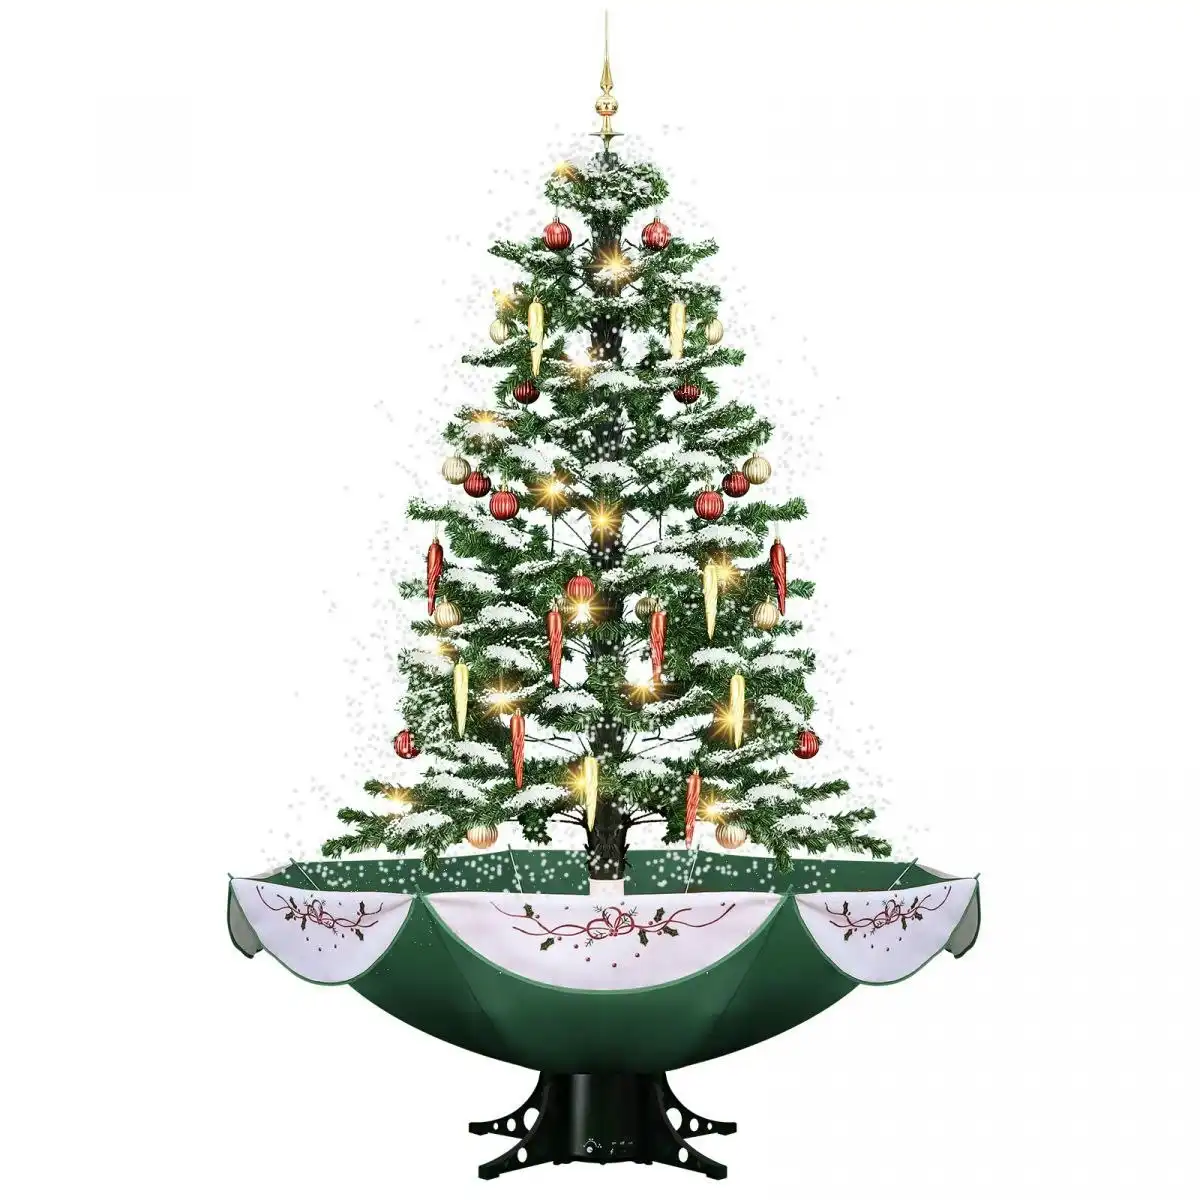 Solight Snowing Christmas Tree Green Artificial Xmas Topper LED String Fairy Lights Decoration Ball Musical Snow Ornament Umbrella Stand 140cm